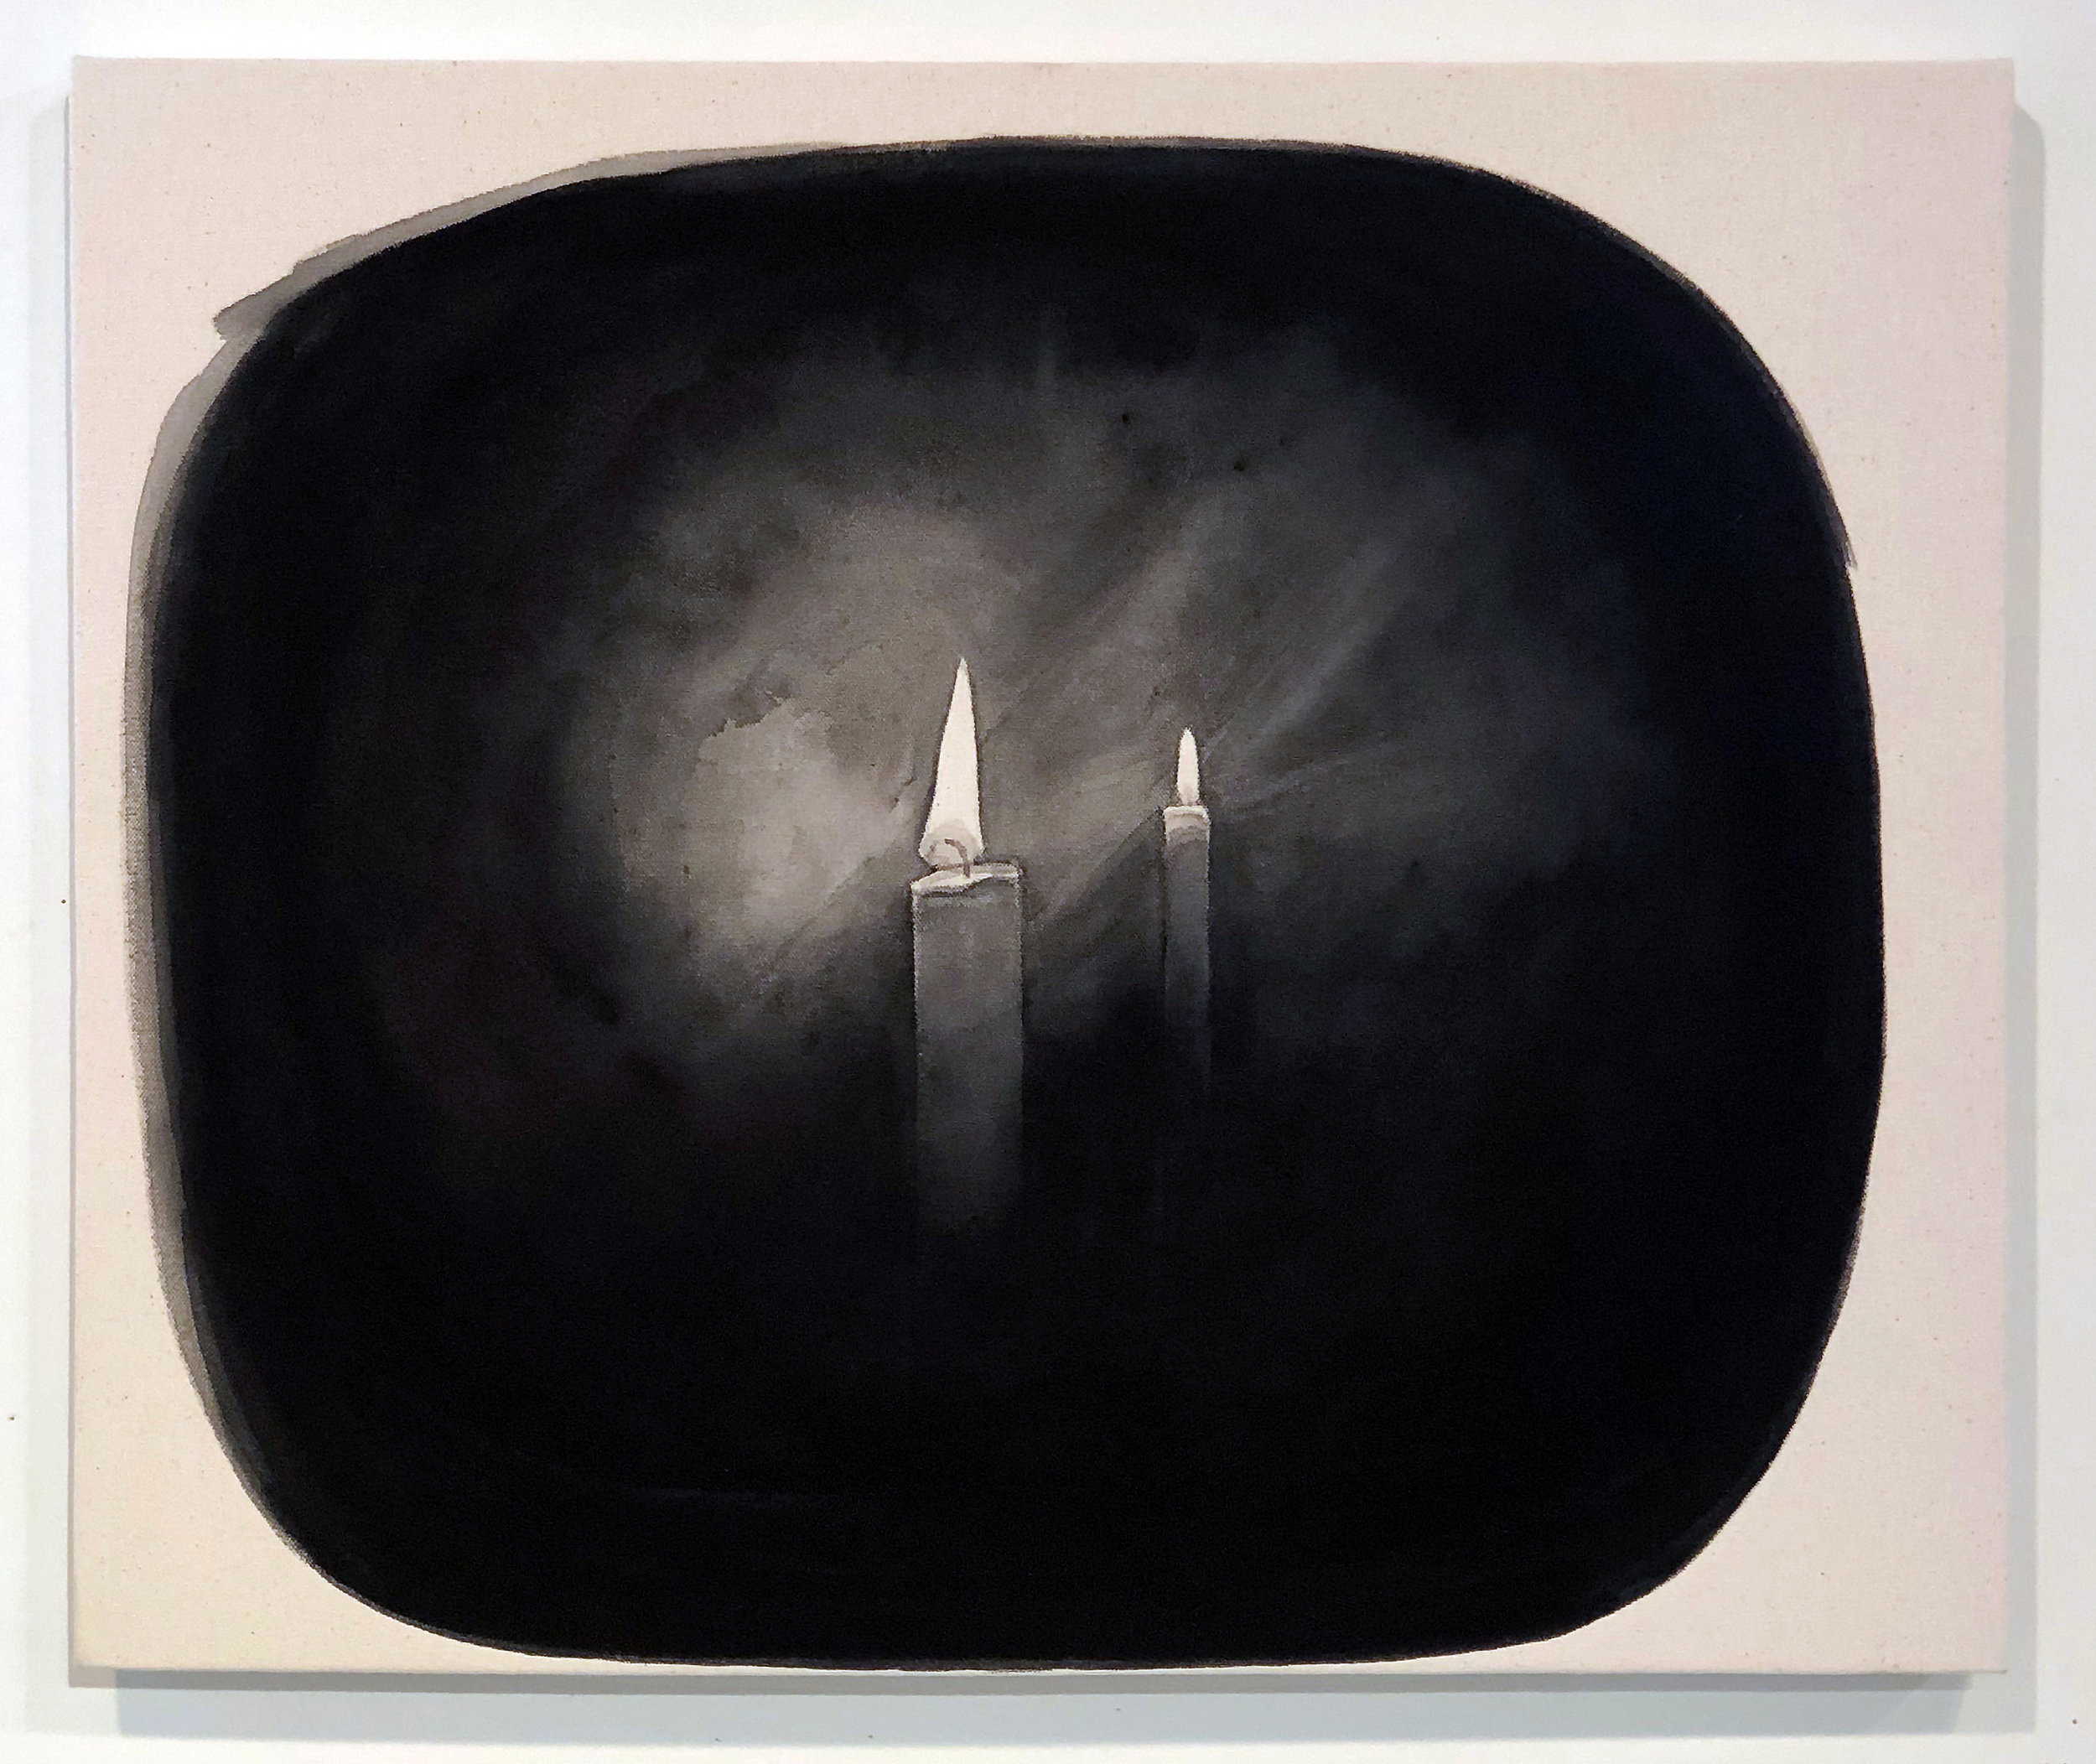   Candles (at Felix’s, Greenpoint),  2019 Black gesso on canvas 23.5 x 19.5 inches (59.7cm x 49.5cm) 